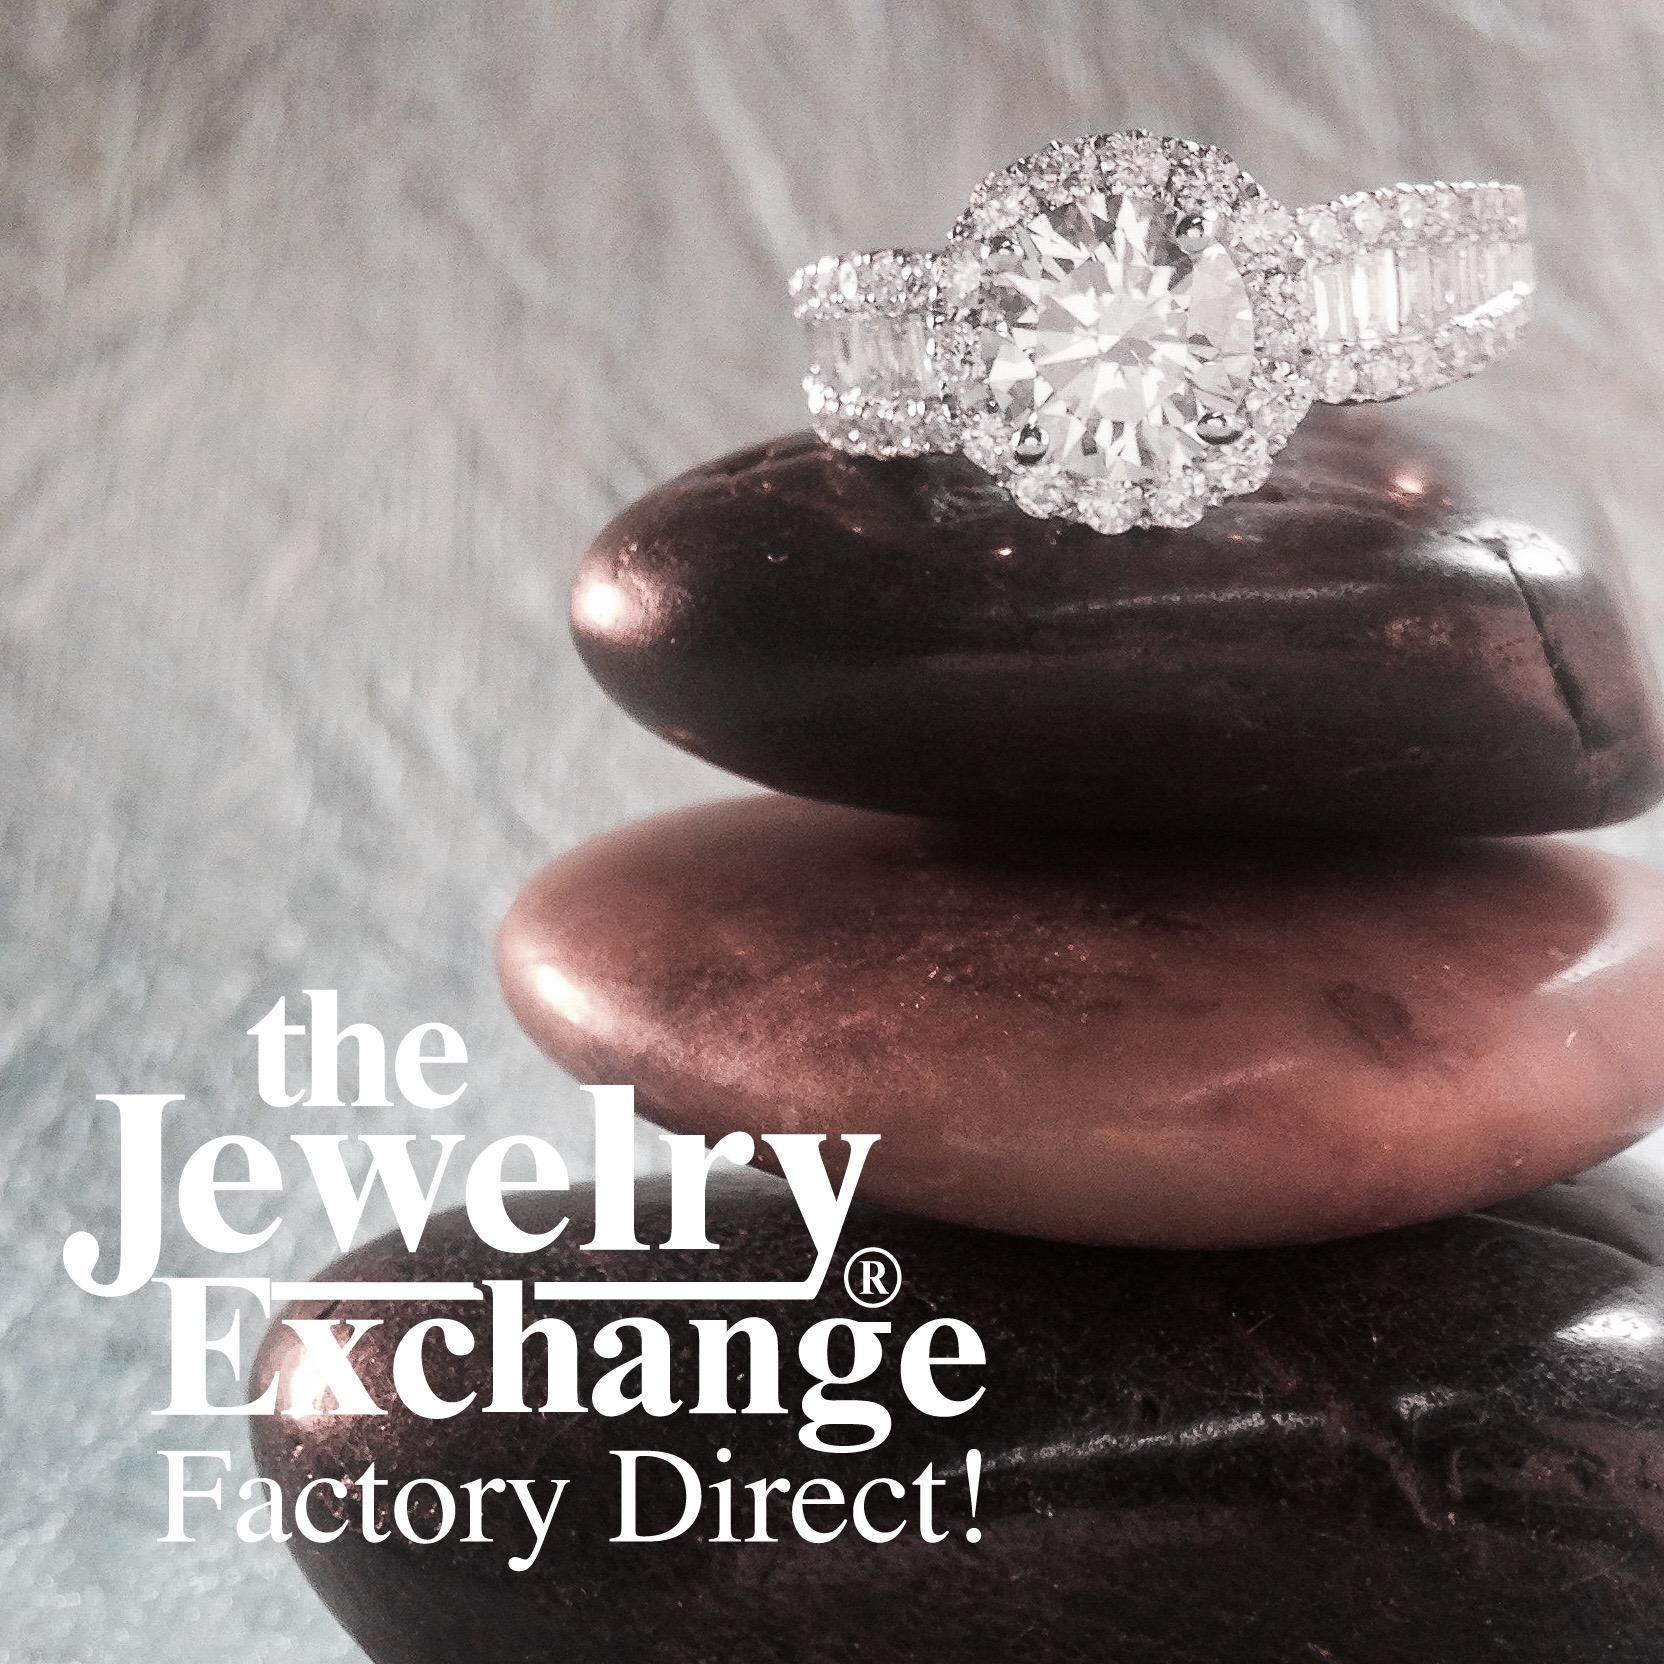 The Jewelry Exchange in Phoenix | Jewelry Store | Engagement Ring Specials Photo